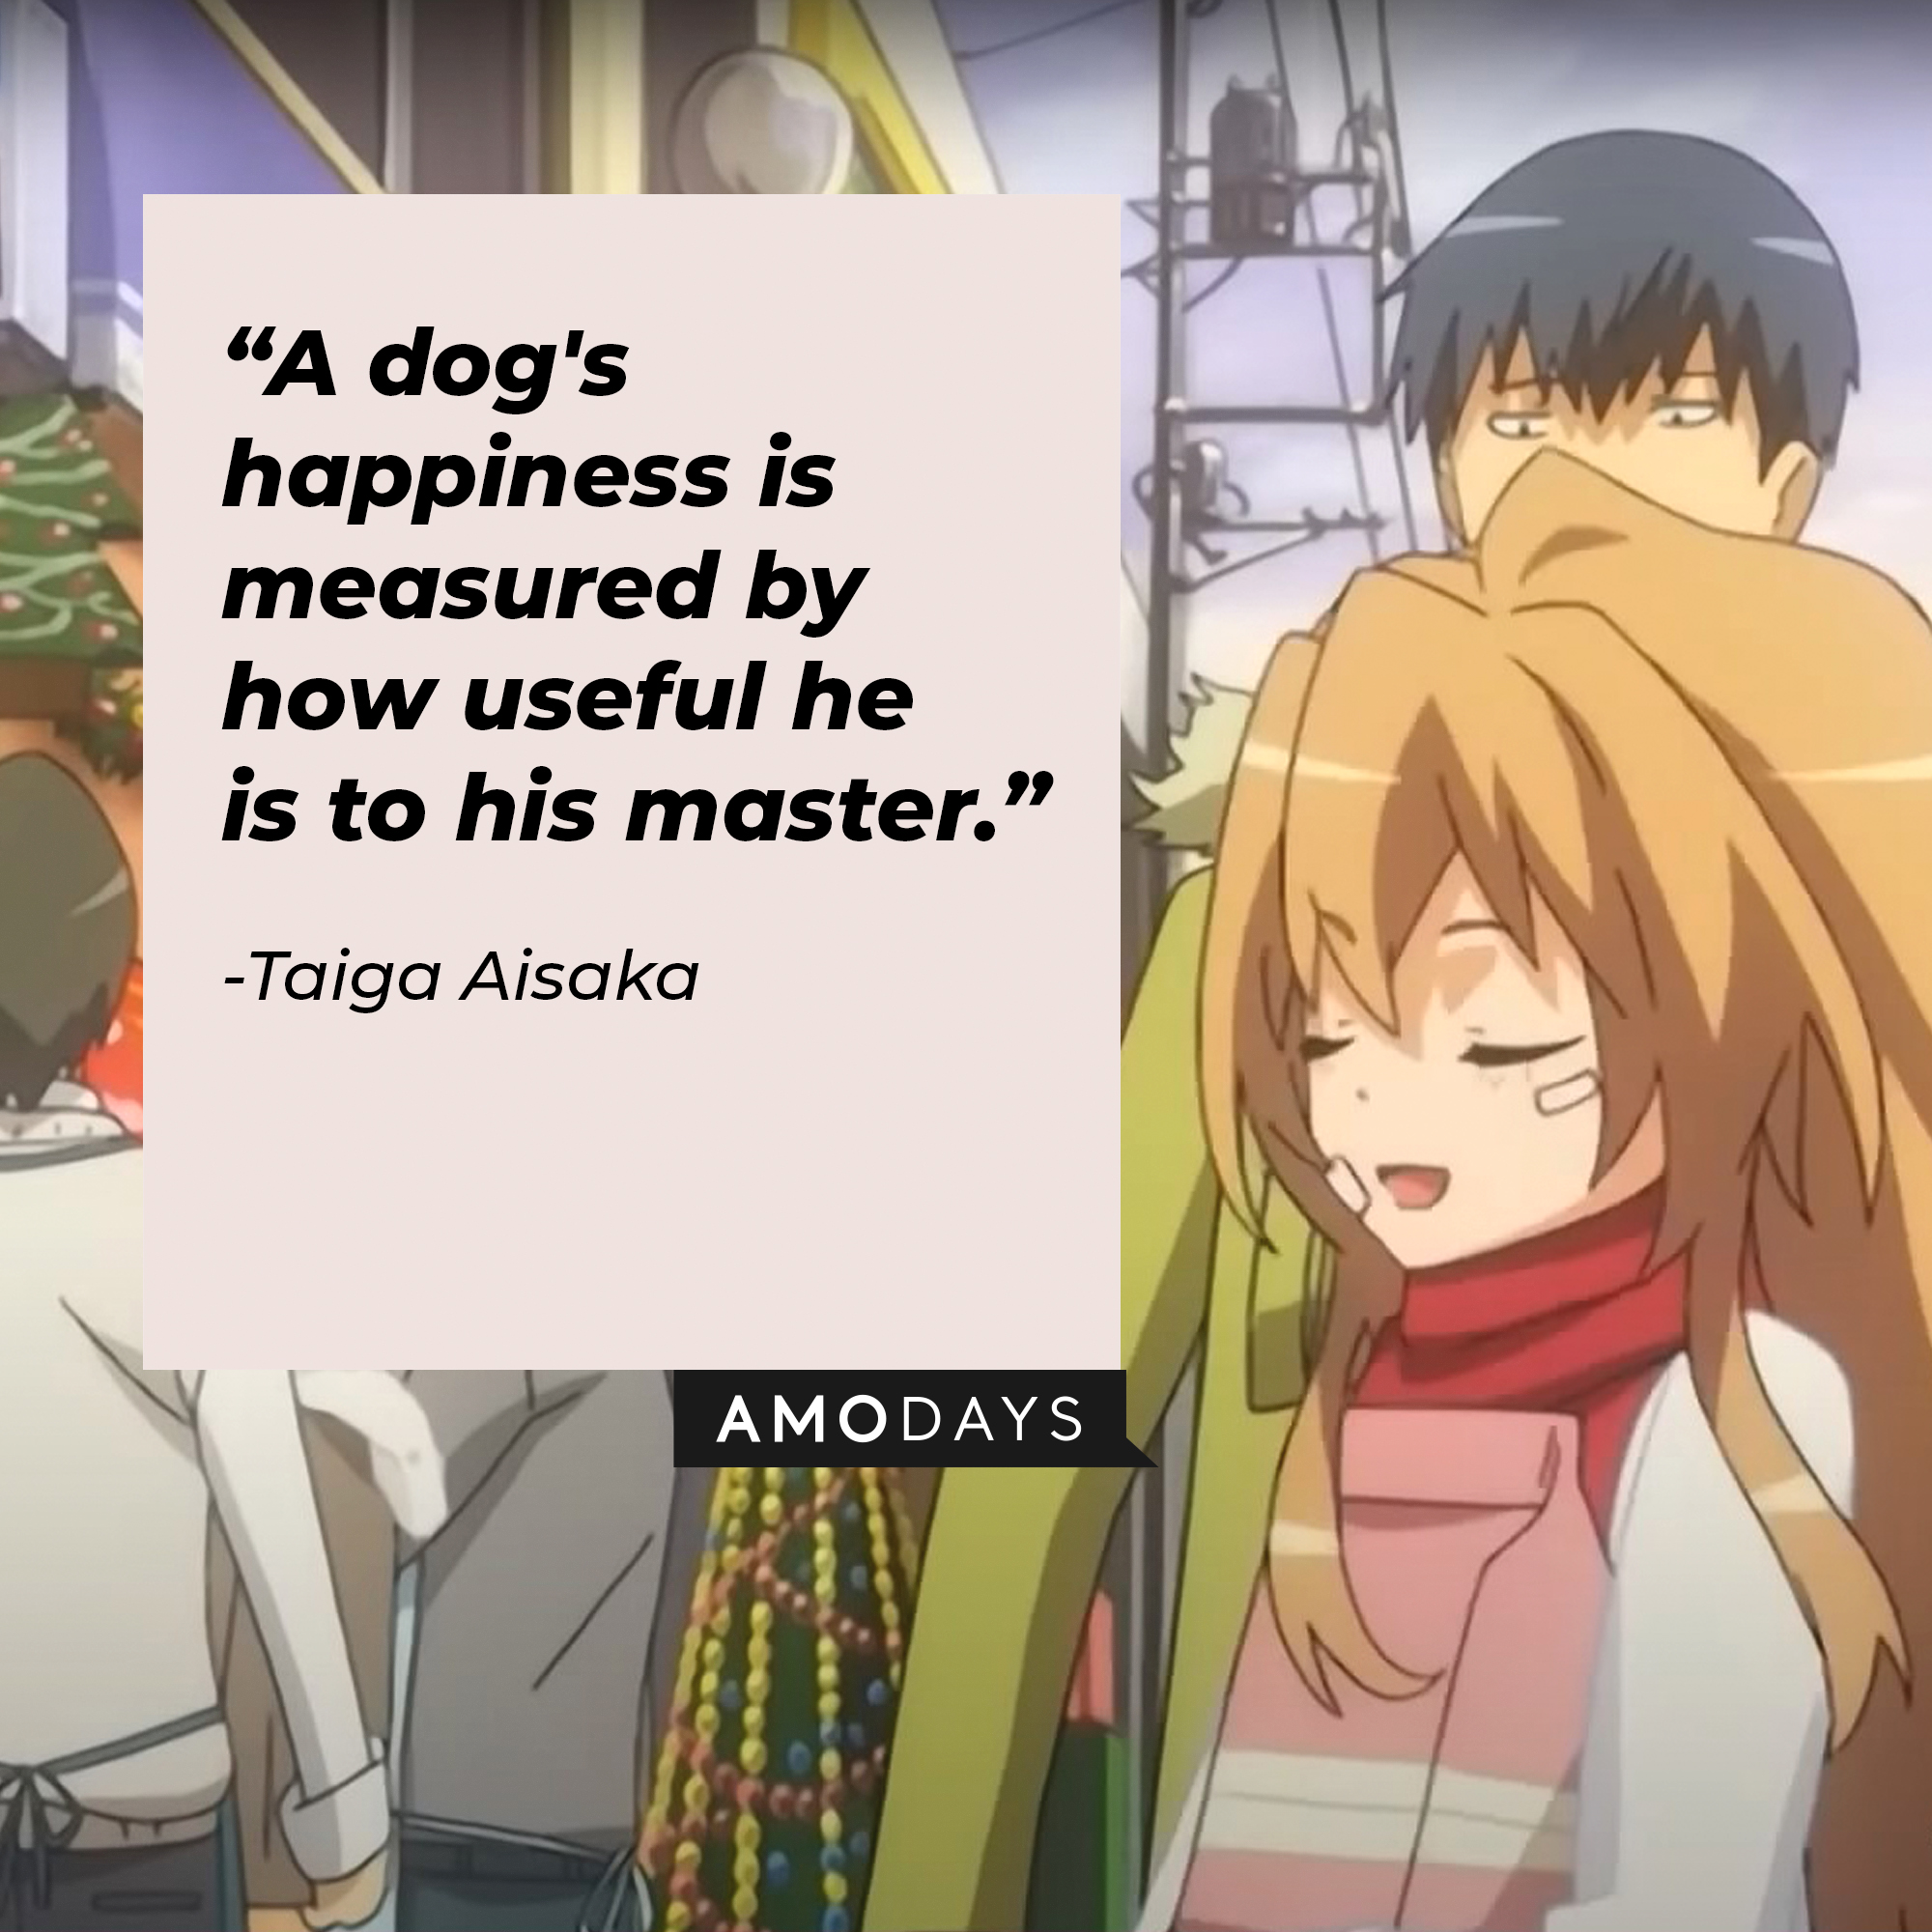 A picture of the animated character Taiga Aisaka with a quote by her: “A dog's happiness is measured by how useful he is to his master.” | Image: facebook.com/toradoraoff